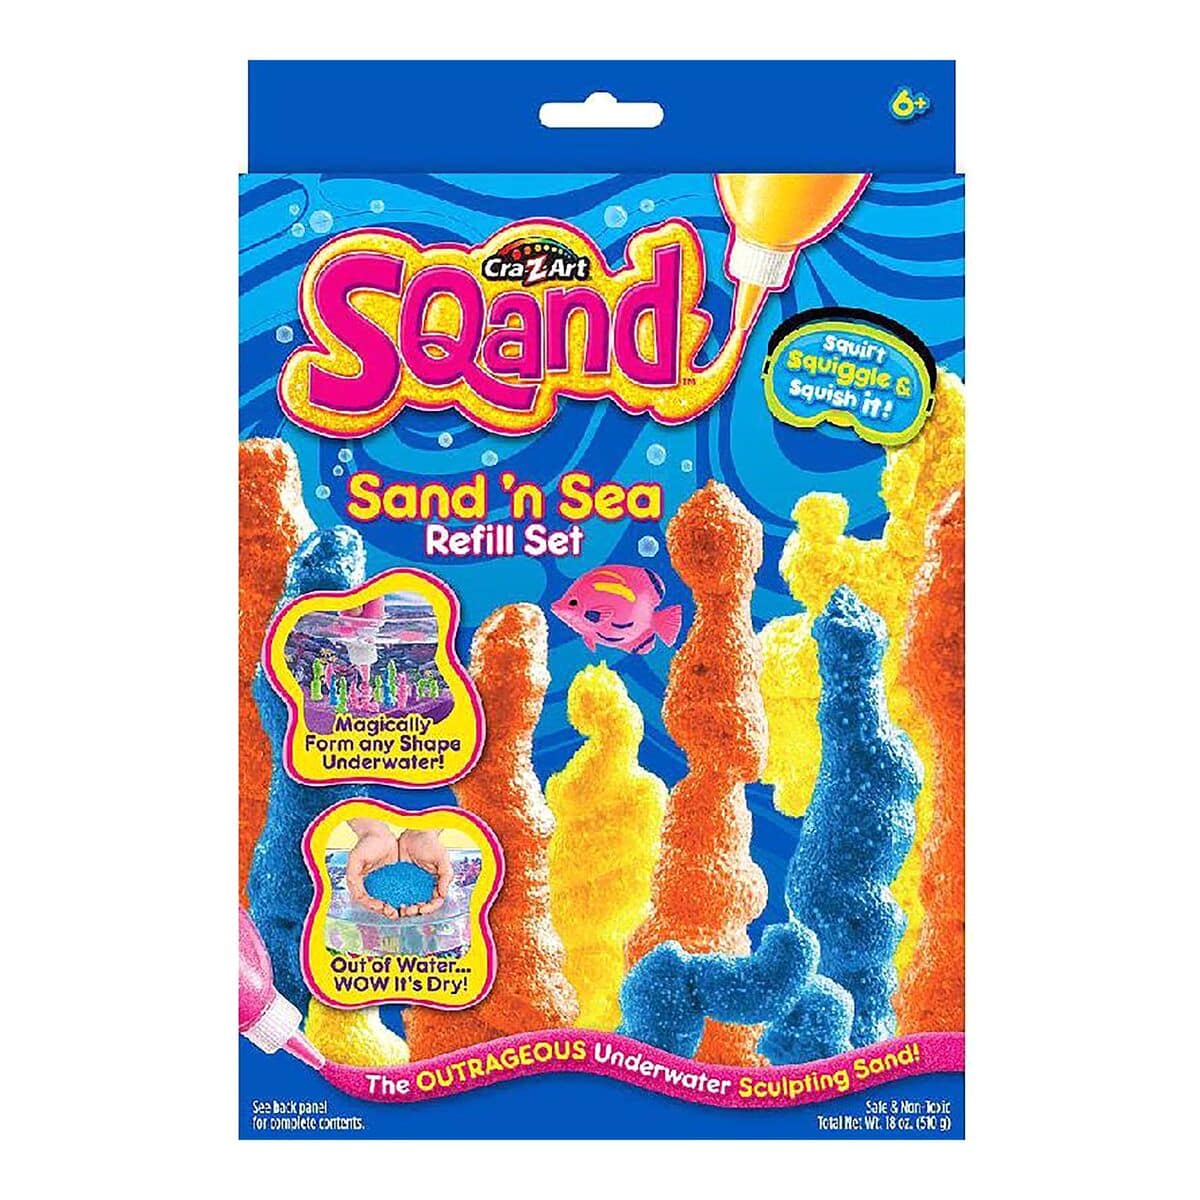 Magic Sand and Sea Sqand Refill